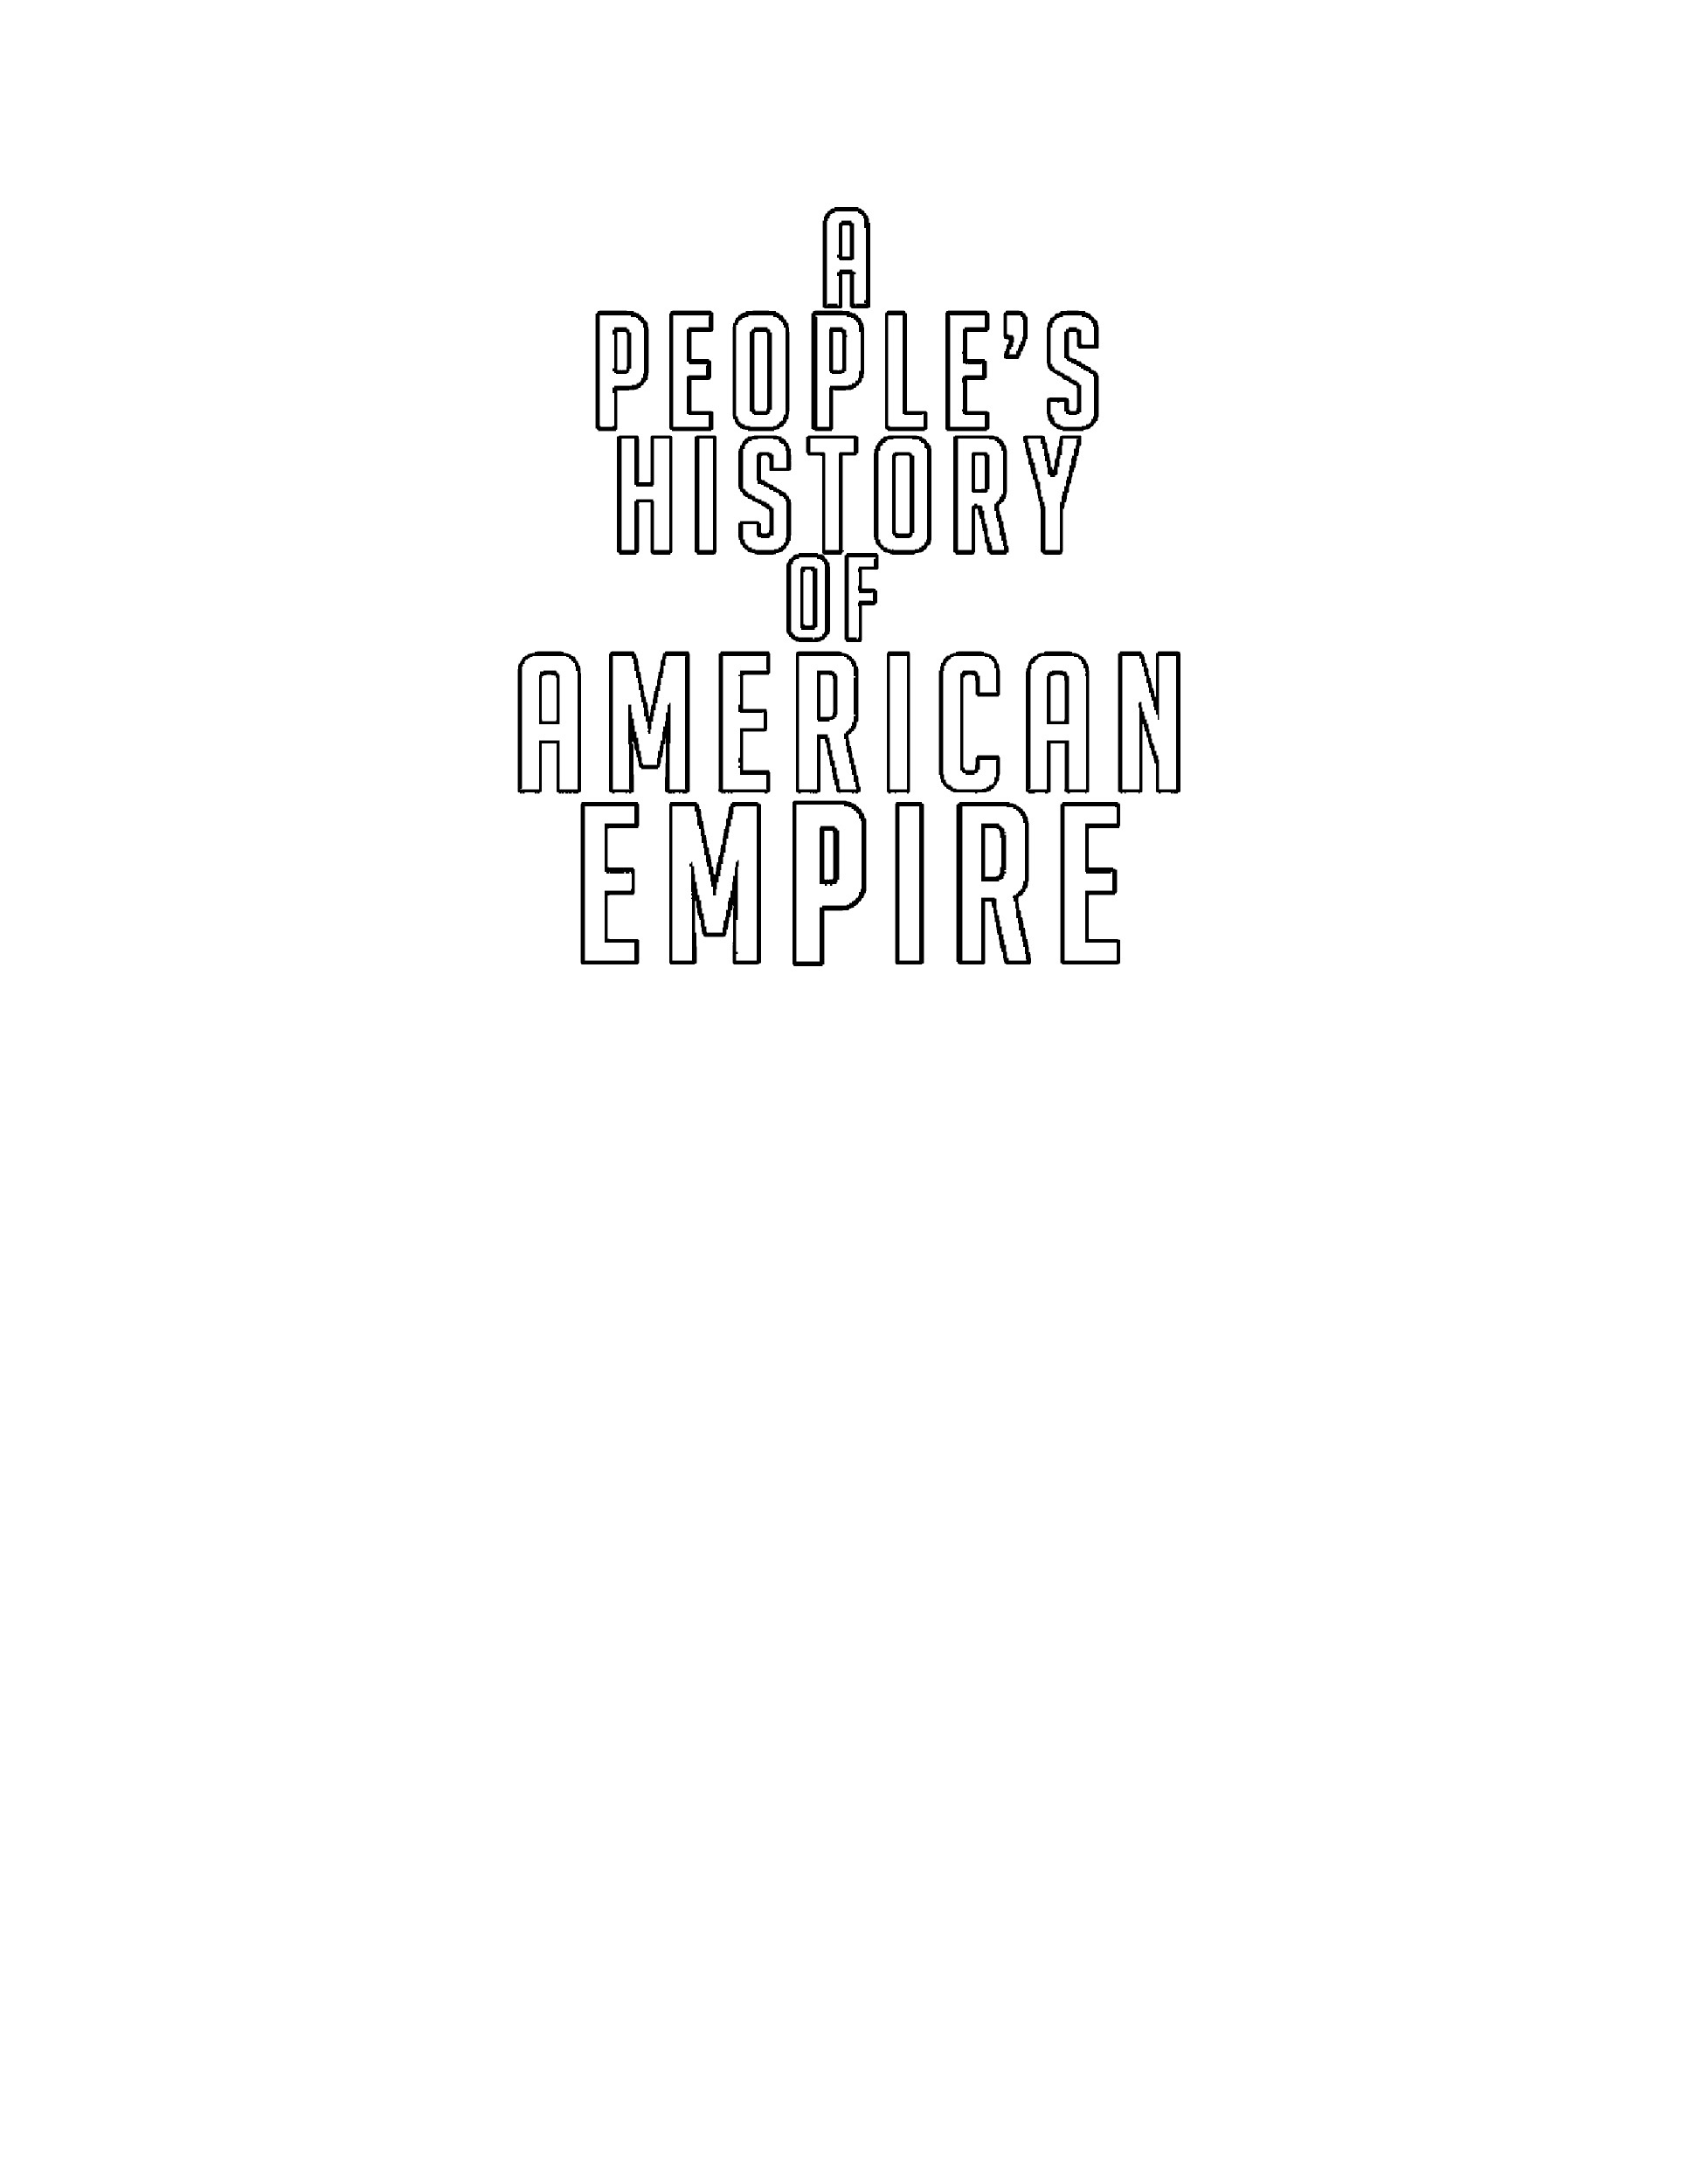 Read online A People's History of American Empire comic -  Issue # TPB (Part 1) - 10